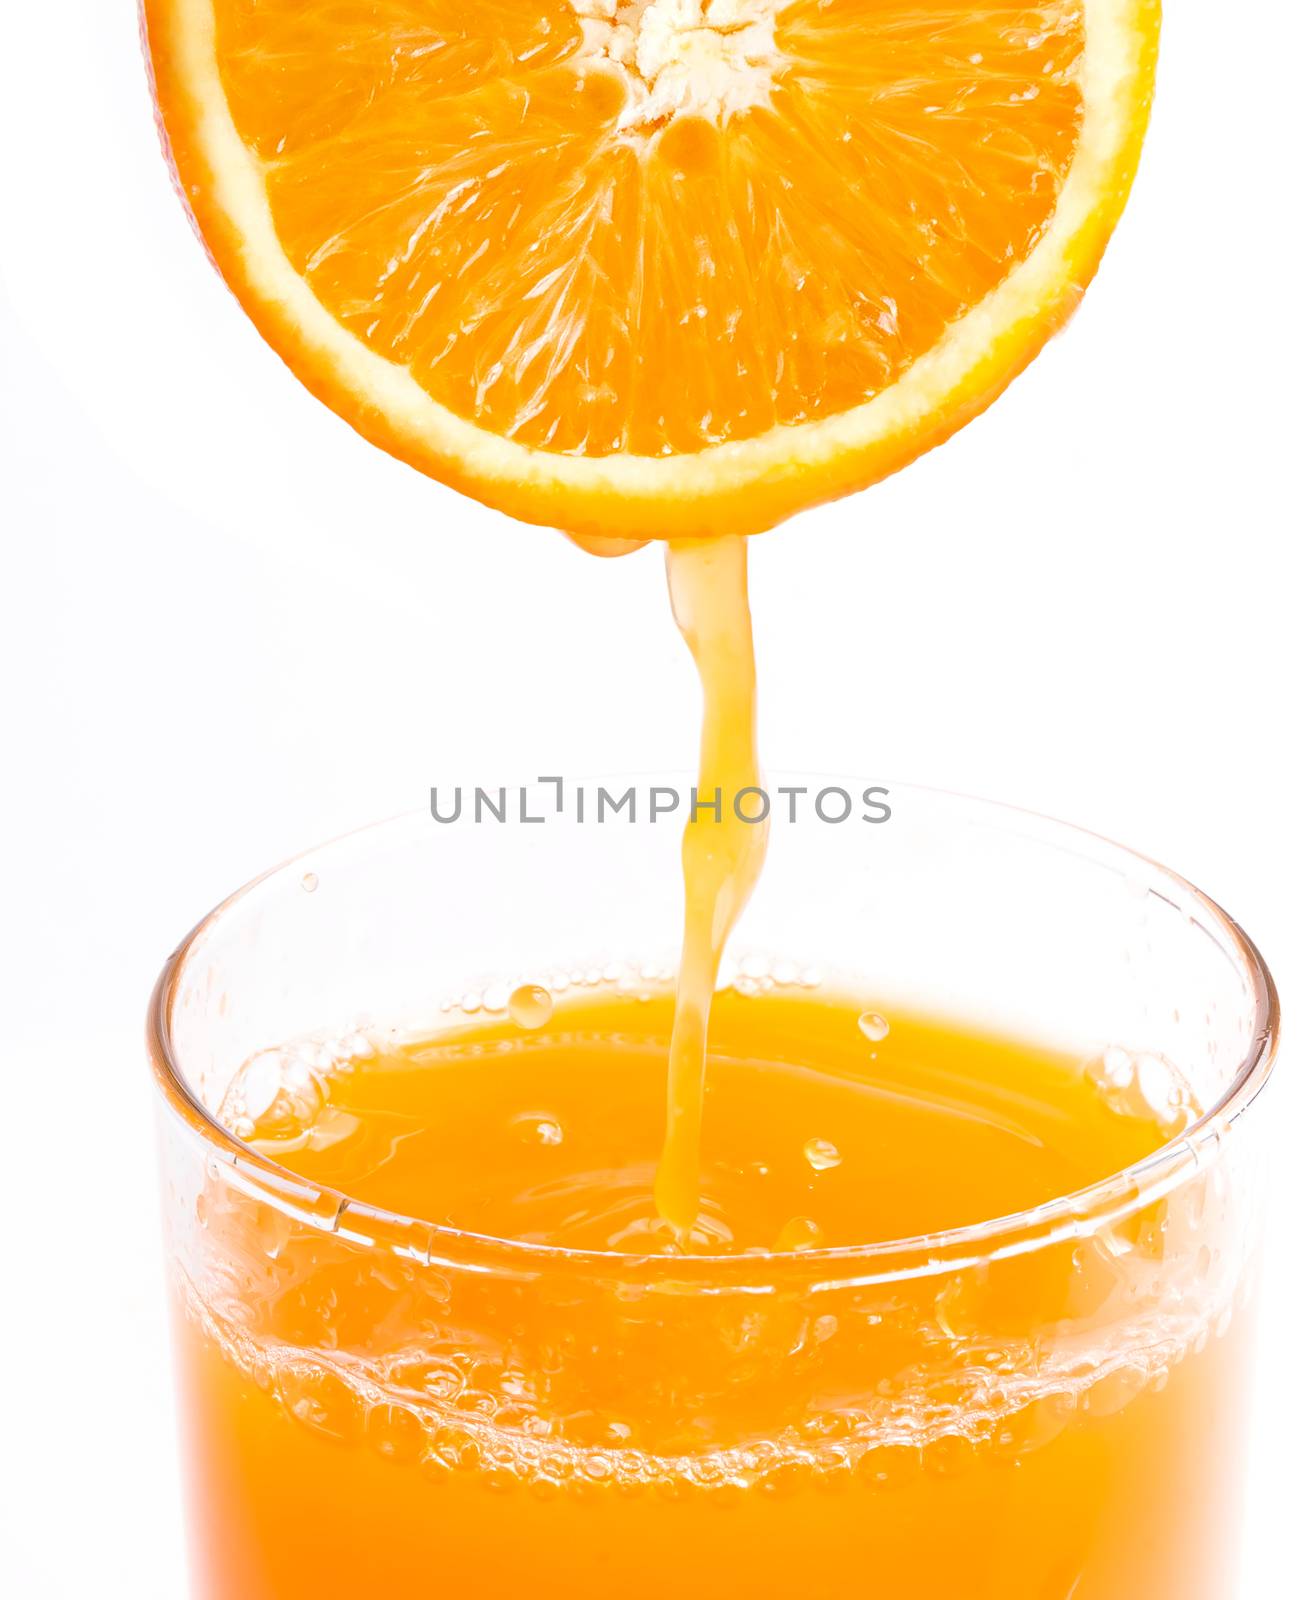 Squeezed Orange Juice Shows Refresh Healthy And Refreshment   by stuartmiles